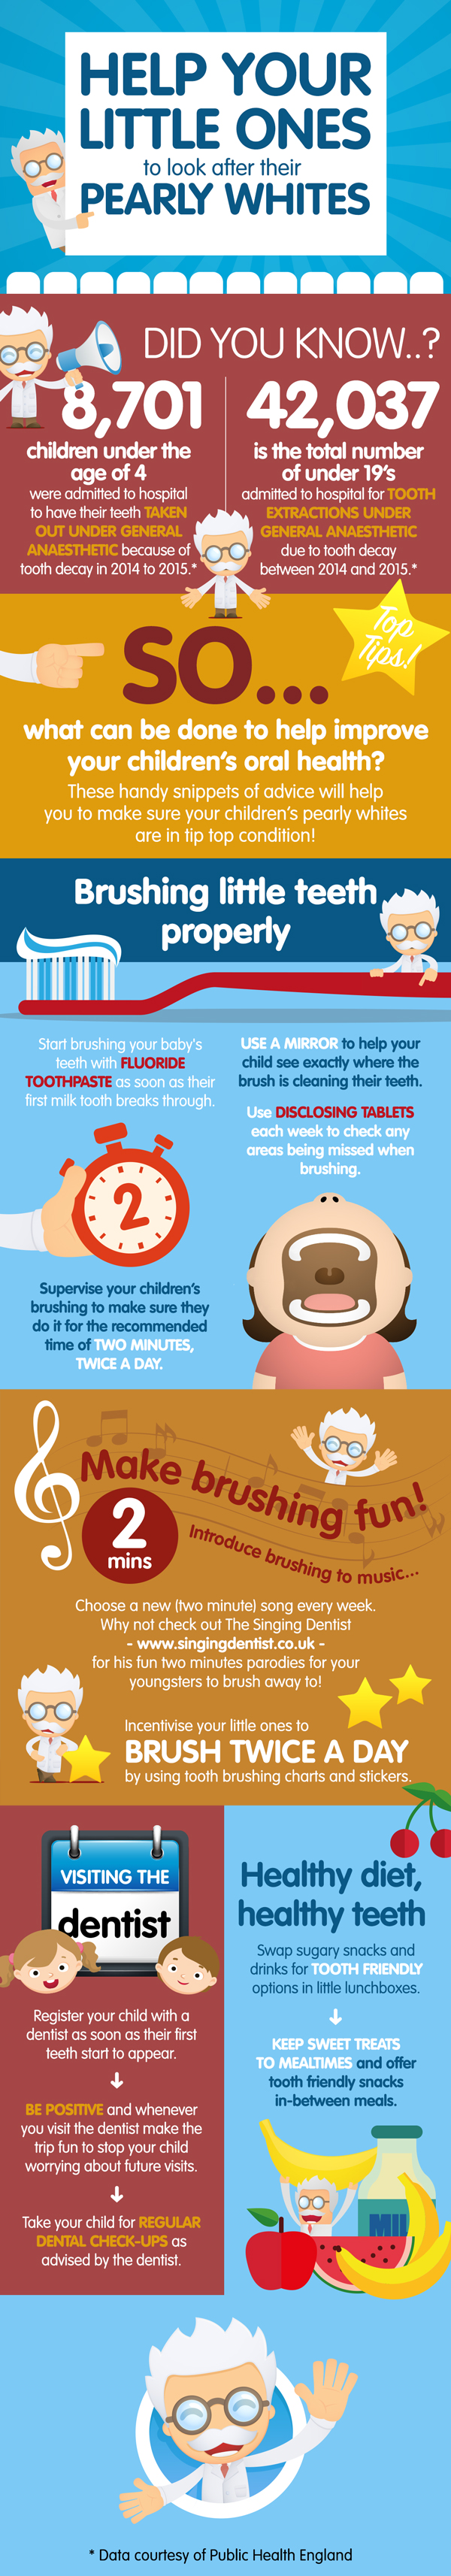 How to look after your children's pearly whites infographic